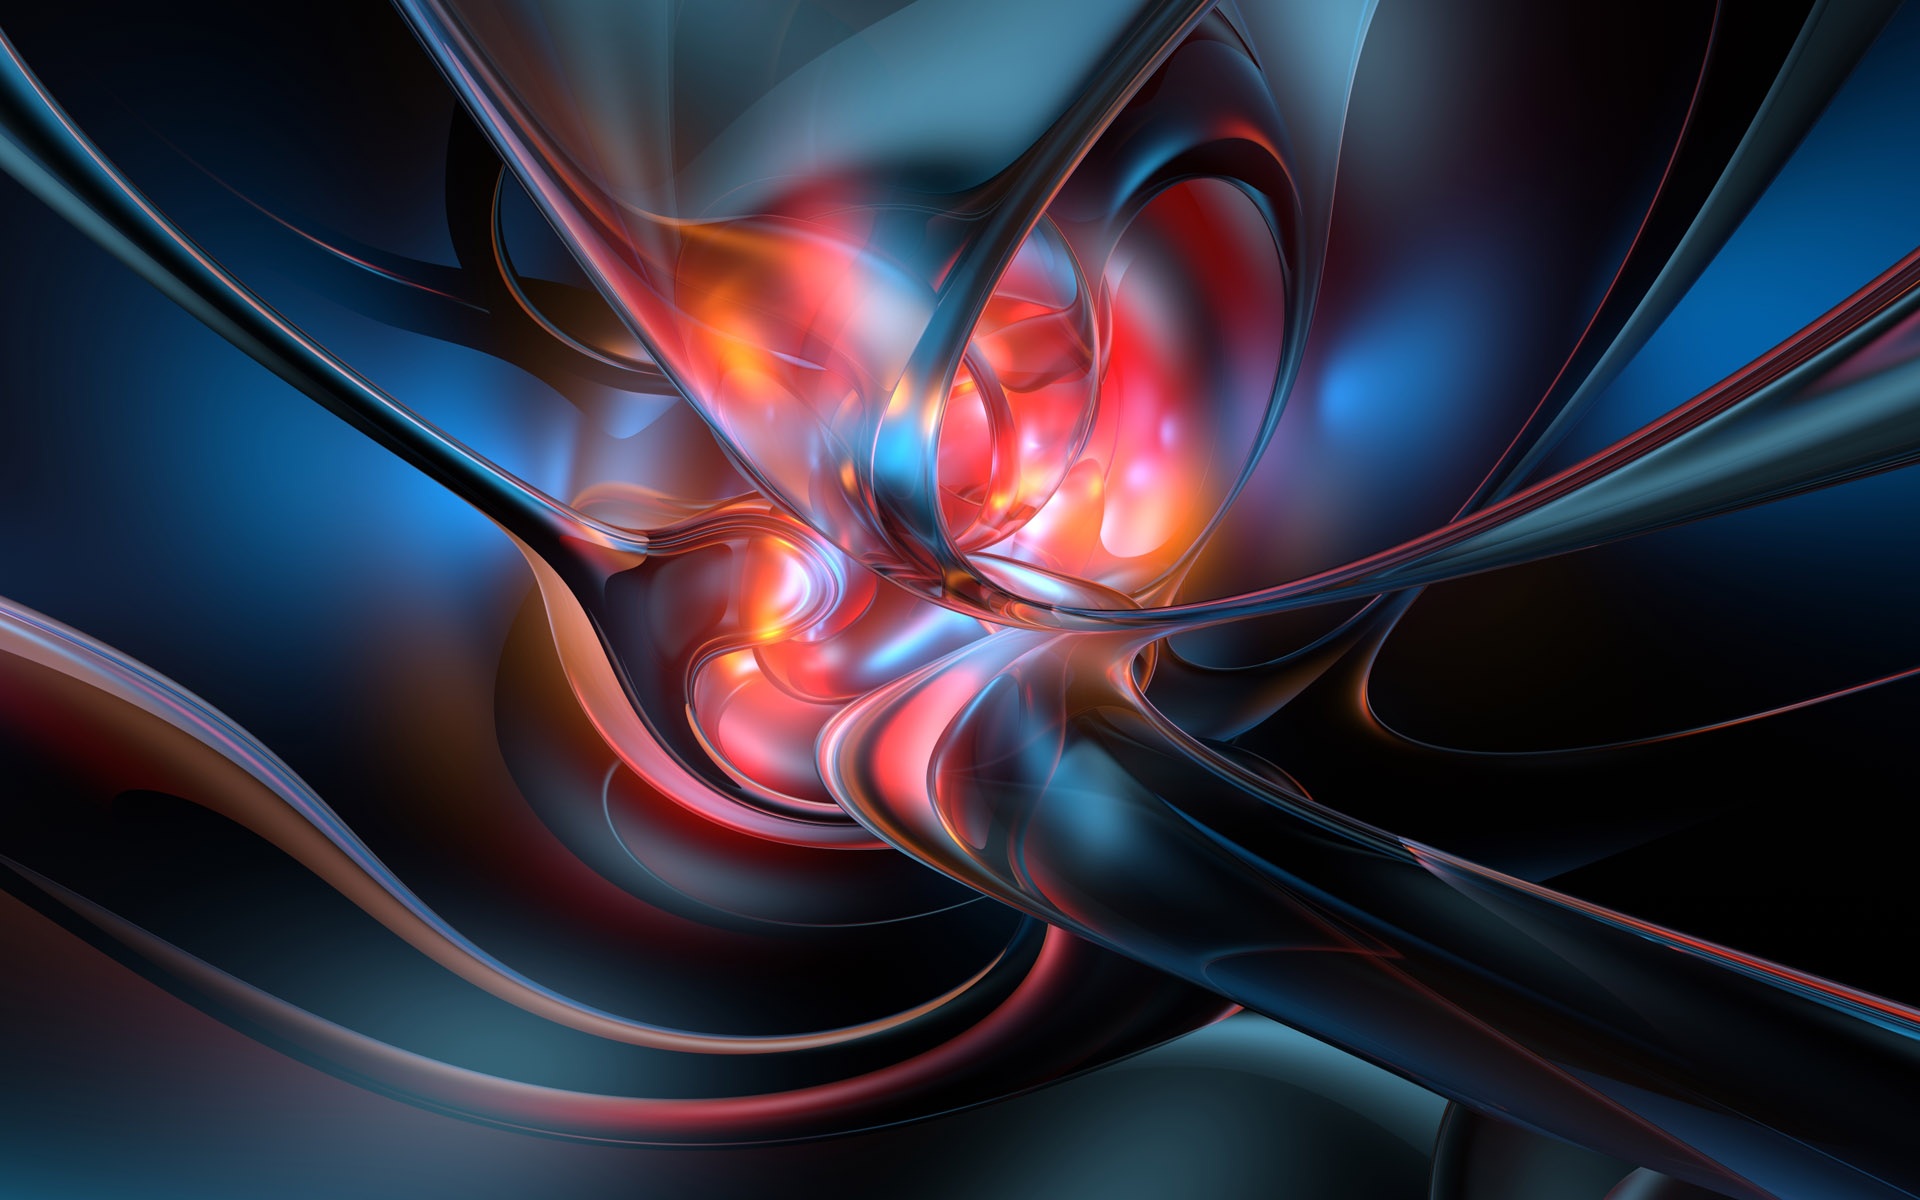 Wallpaper 3D design red energy 1920x1200 HD Picture, Image